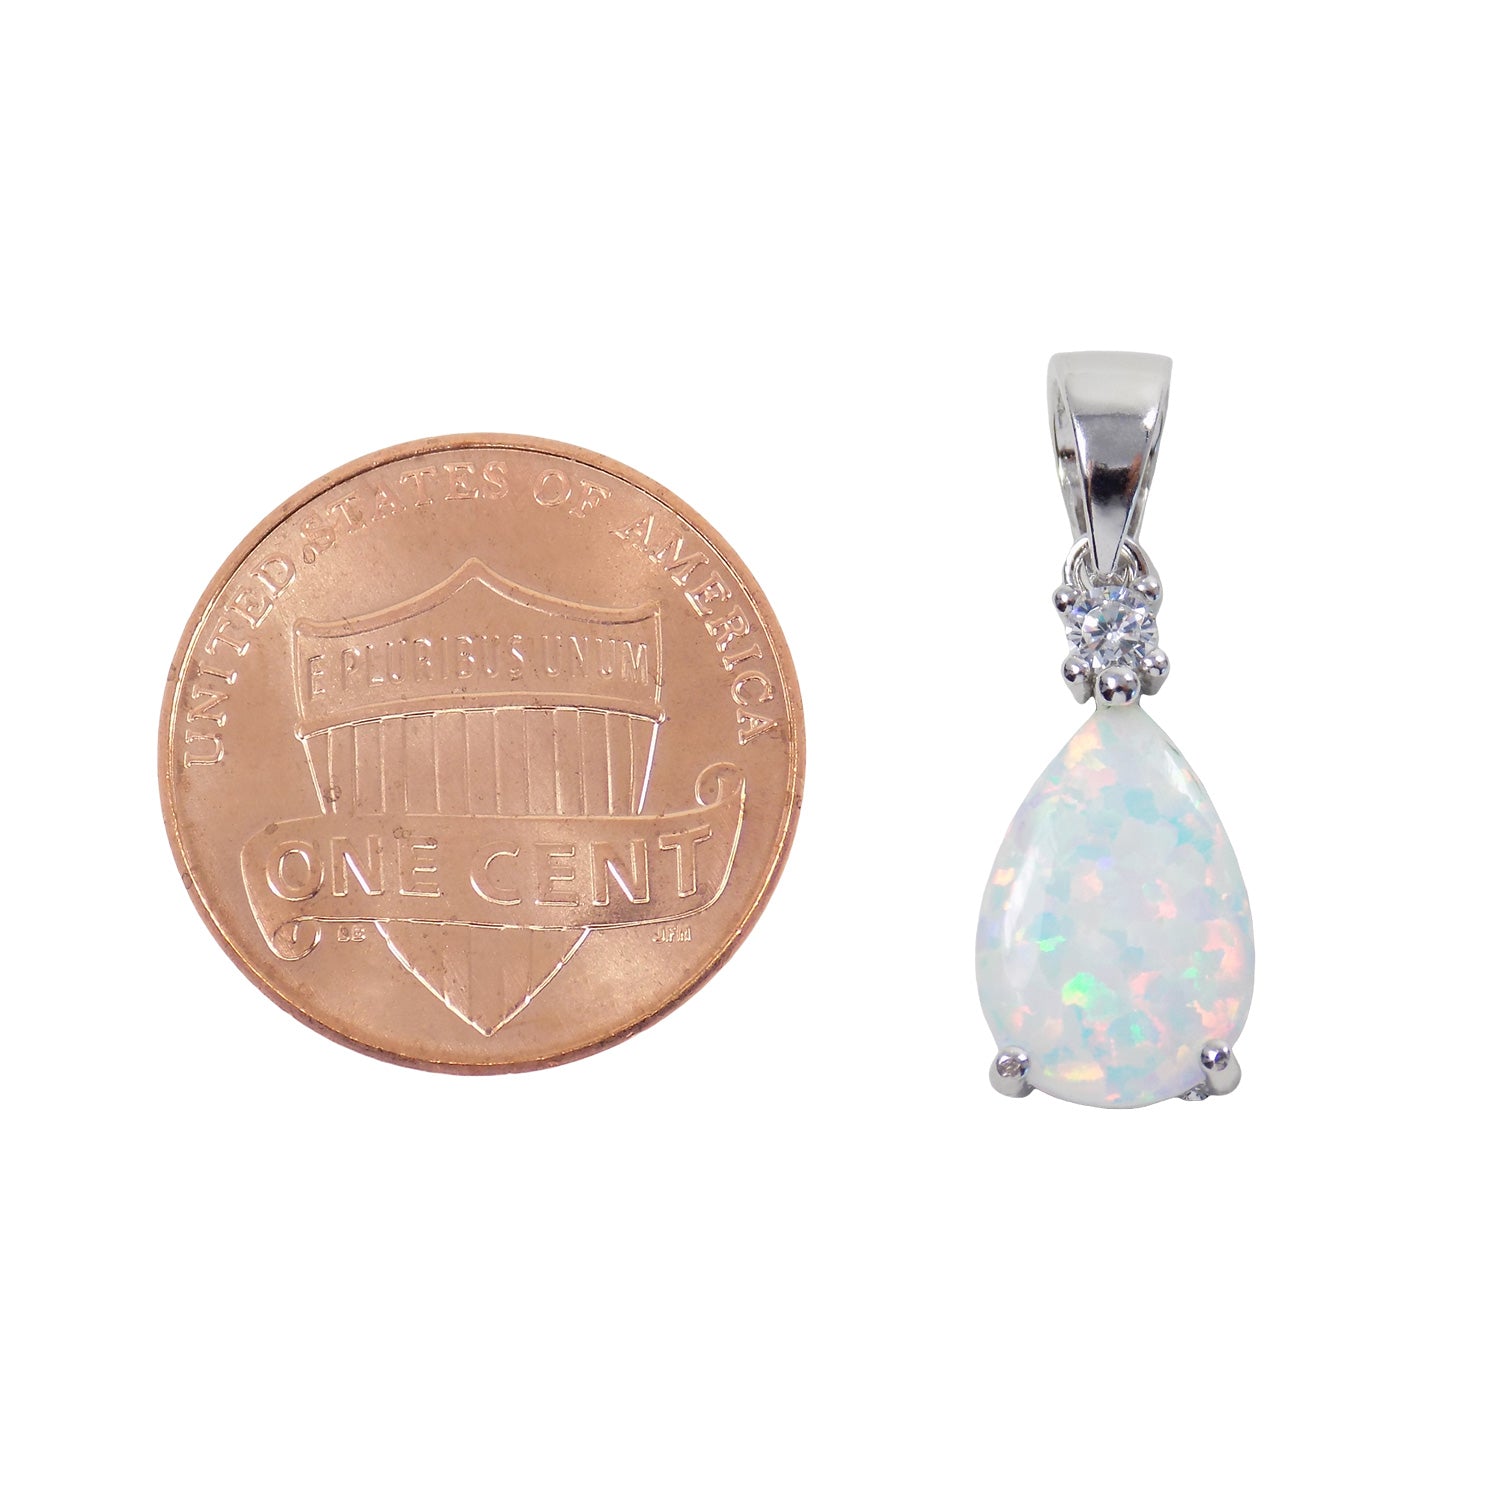 Opal Teardrop Sterling Silver Pendant, White Lab Created Opal and Cubic Zirconia Charm. Opal Drop Pendant